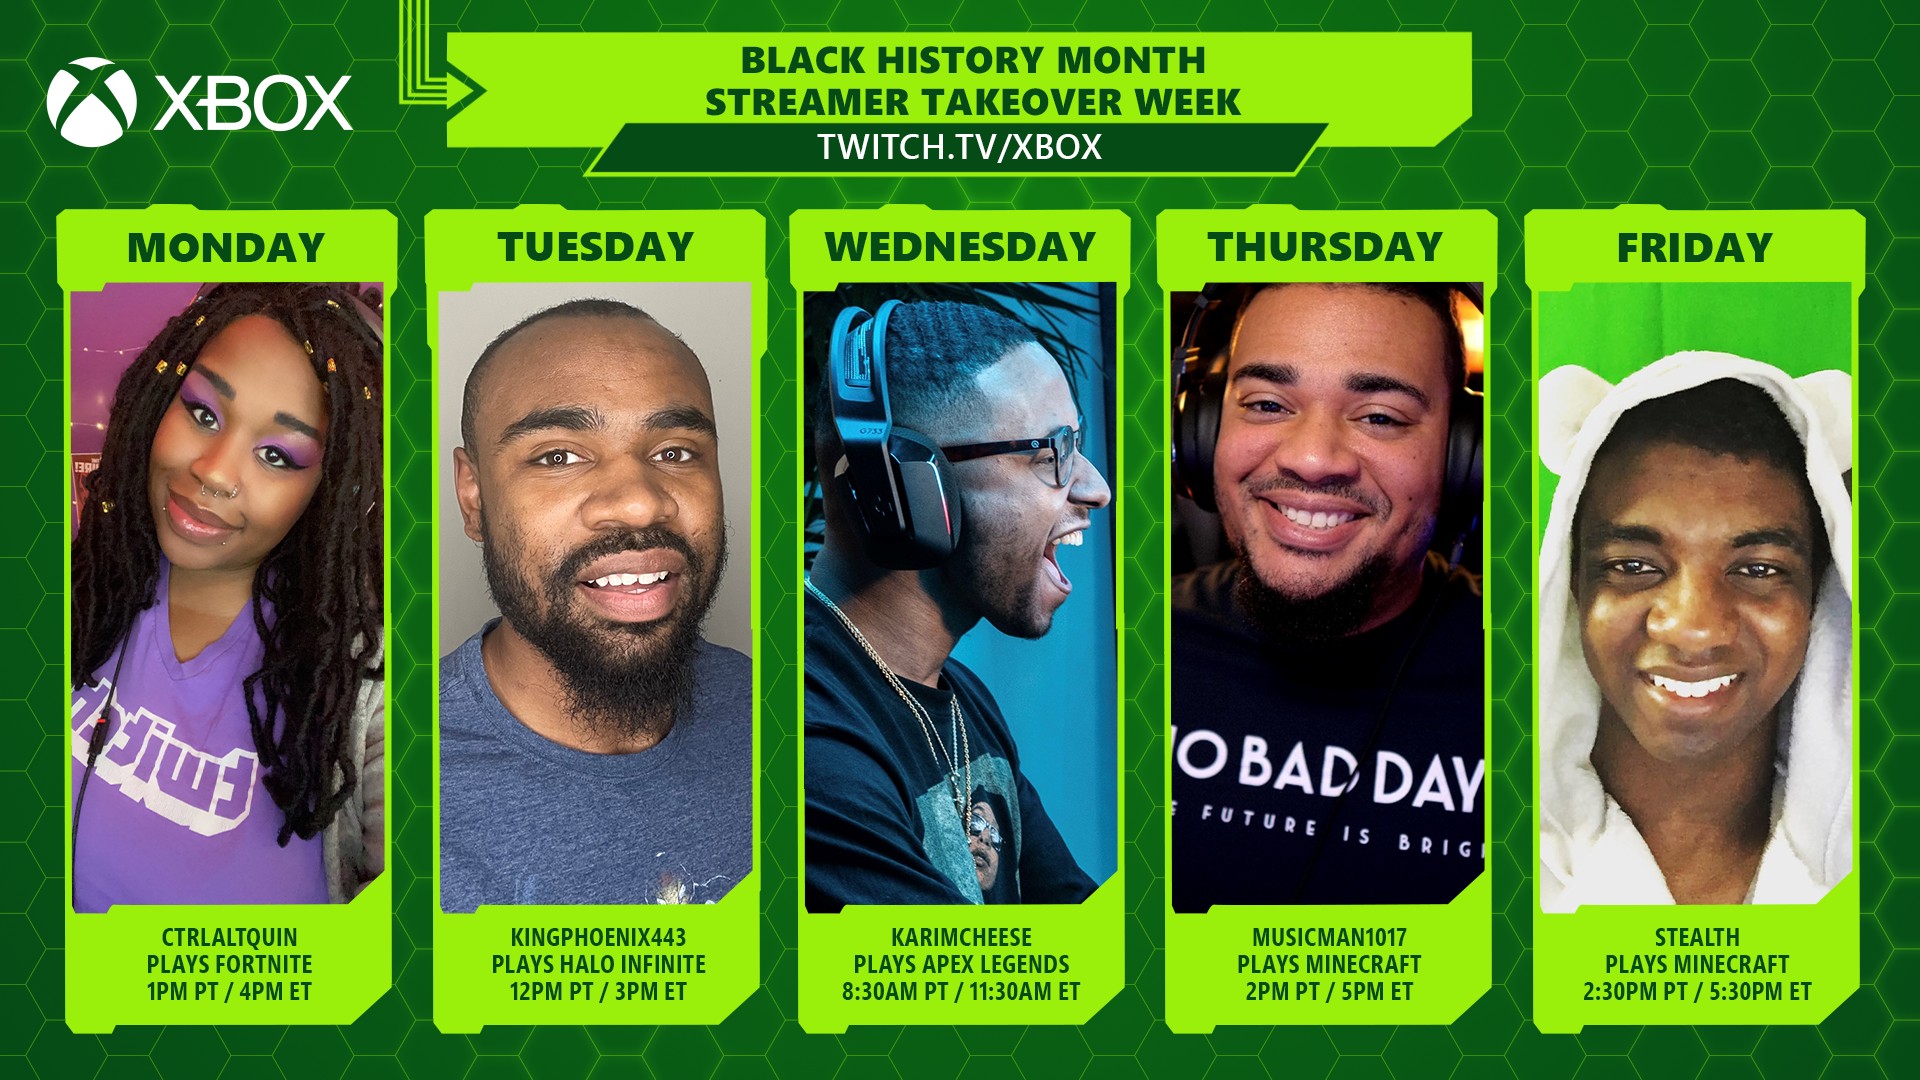 A green hexagonal pattern in the background with five content creators being highlighted. embedded text reads: "Black History Month: Streamer Takeover Week. Twitch.tv/xbox